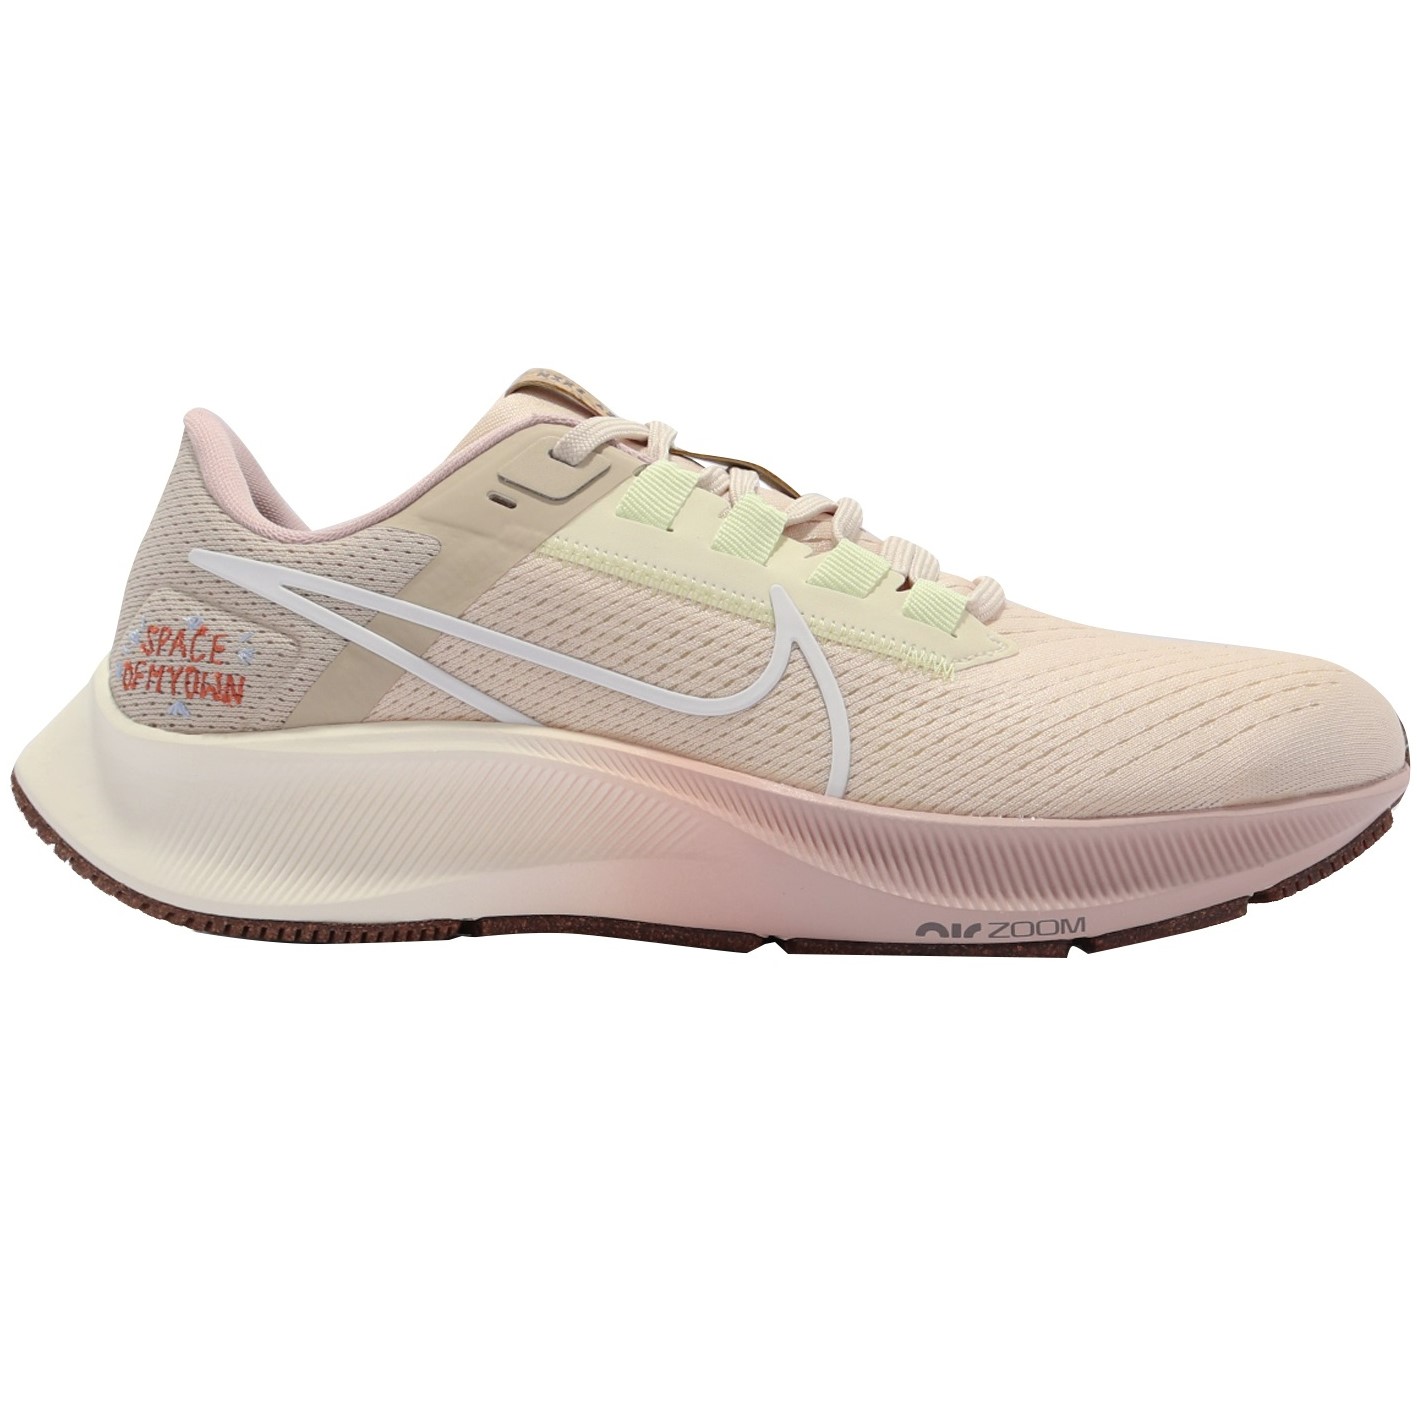 GIÀY THỂ THAO NIKE WMNS AIR ZOOM PEGASUS 38 WOMEN RUNNING SHOES BEIGE 8